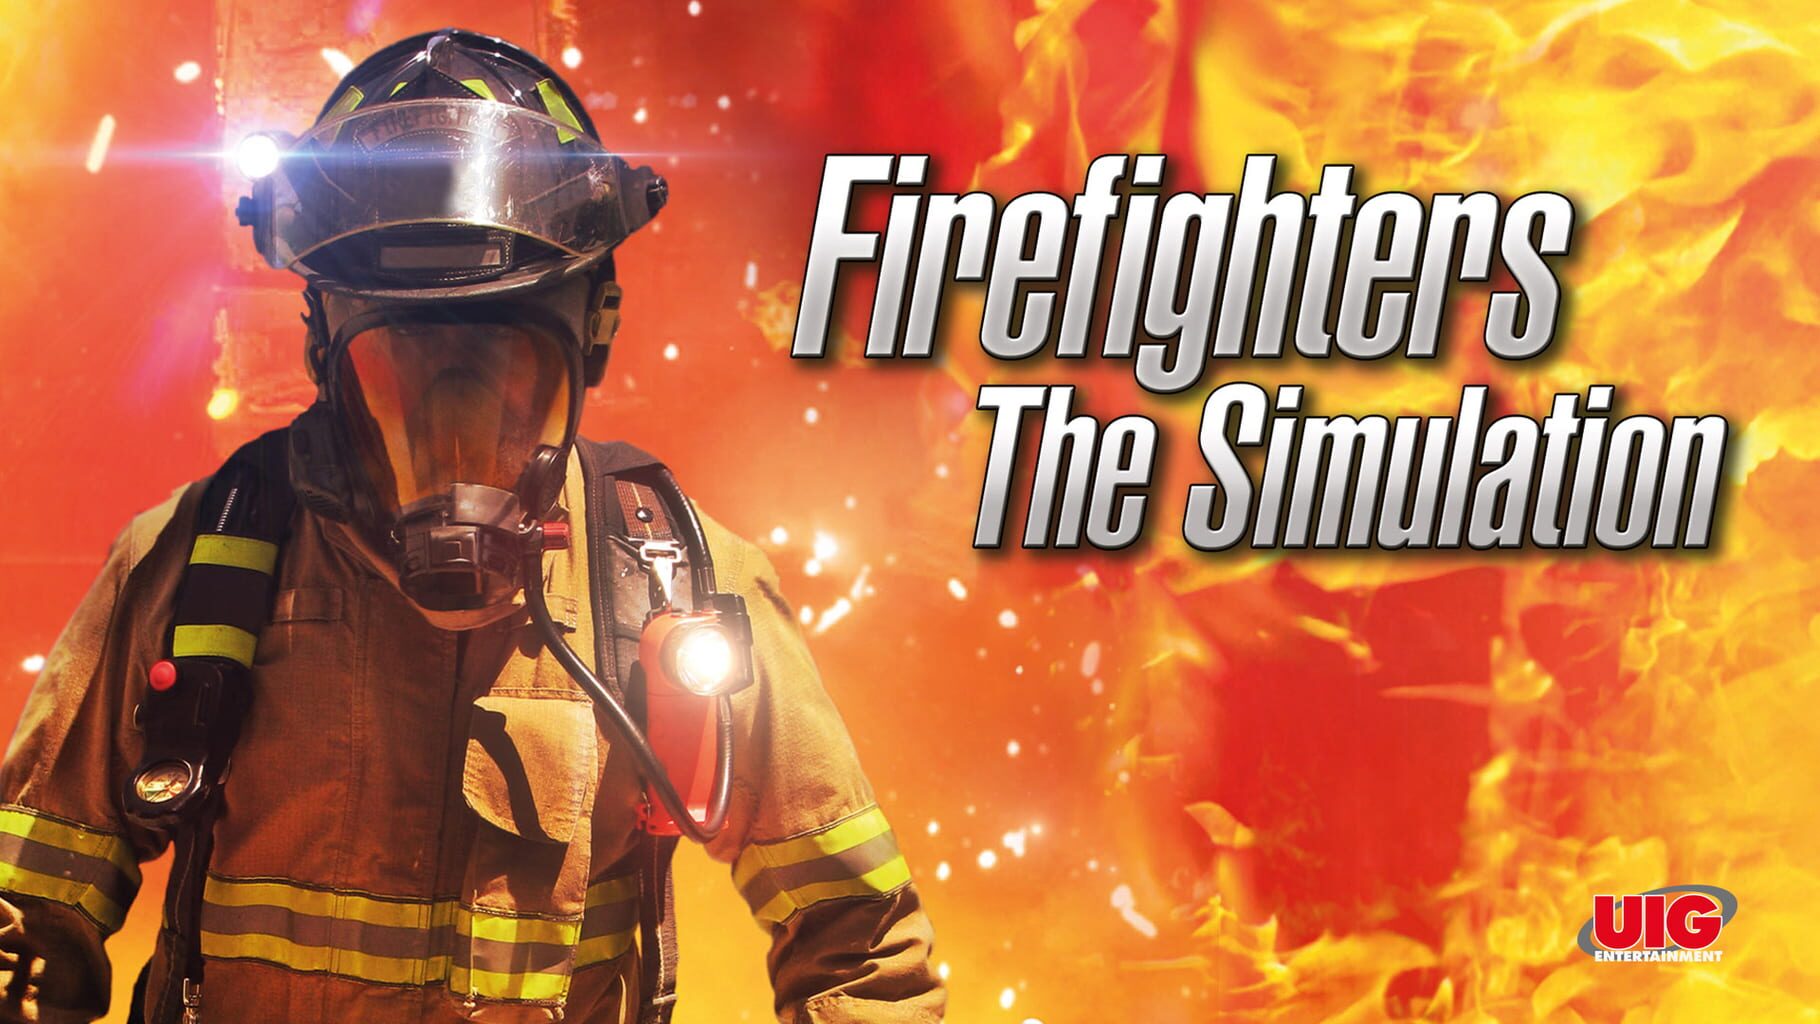 Firefighters: The Simulation artwork